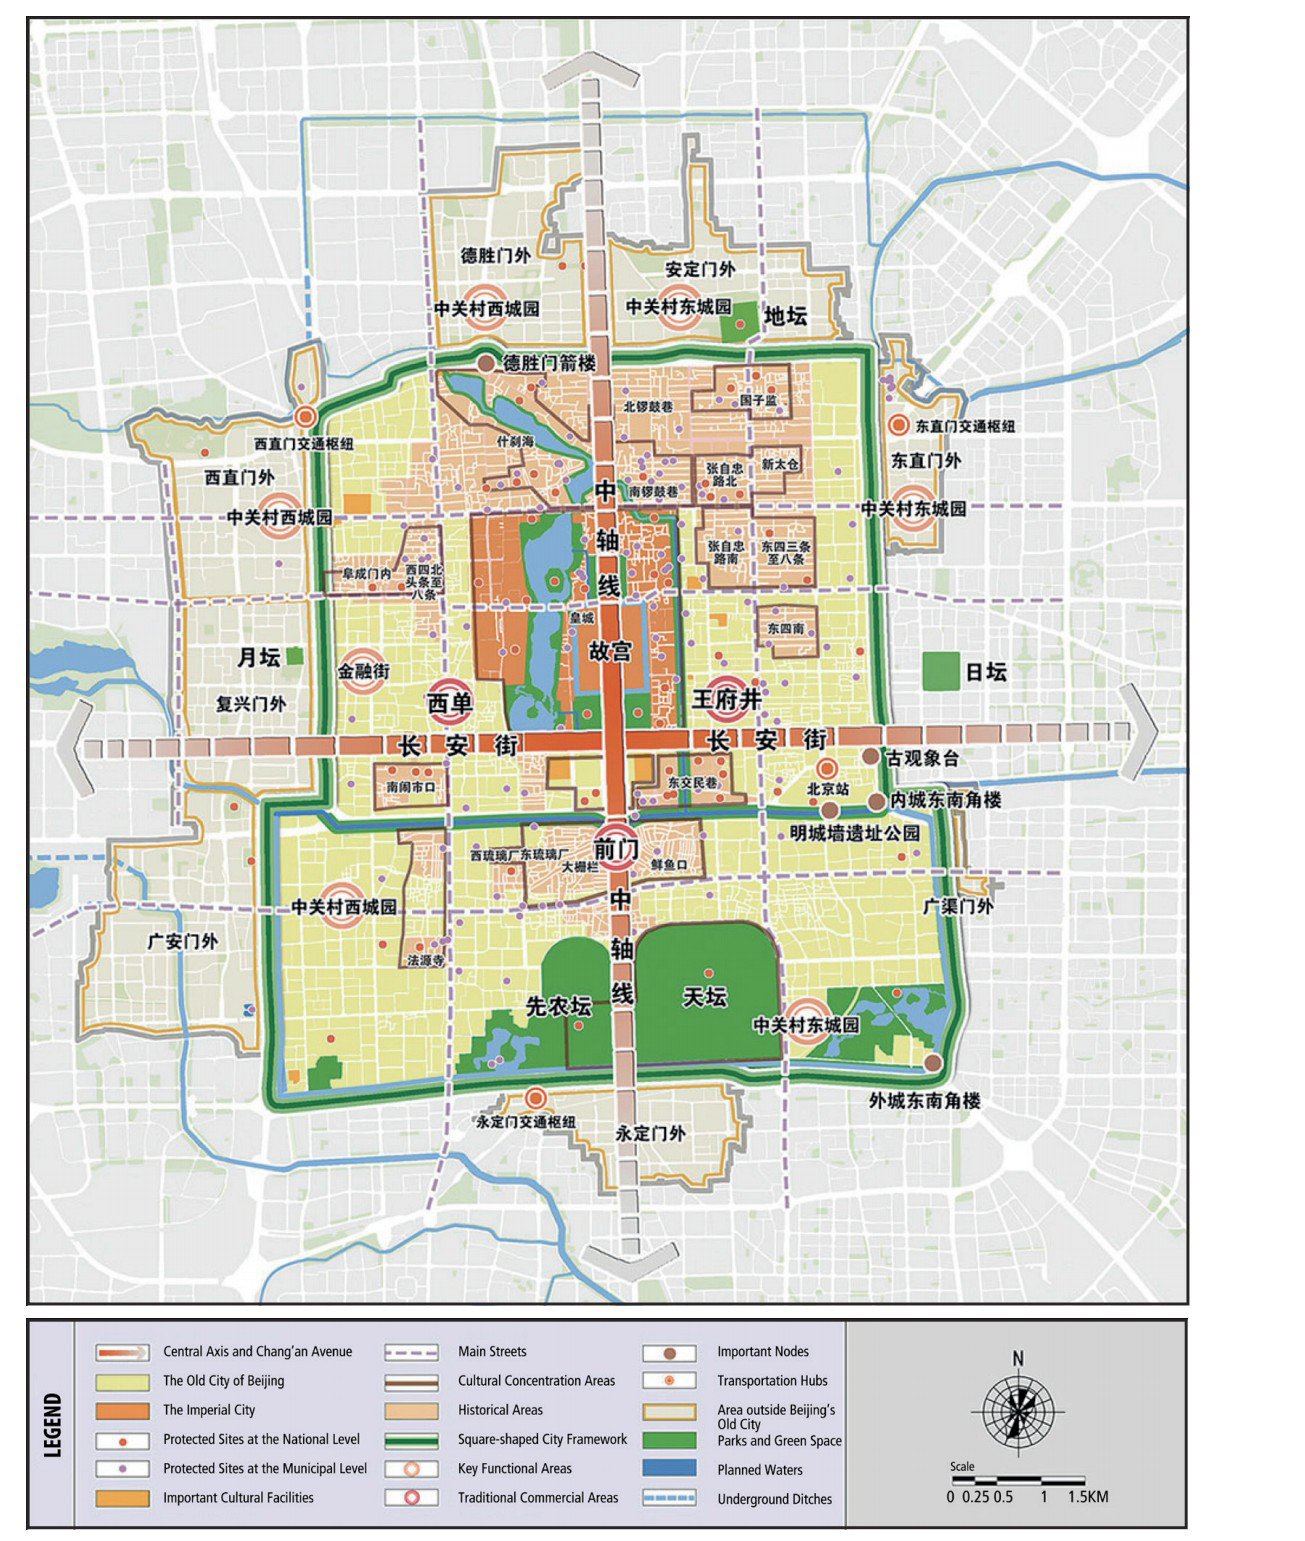 Beijing Master Plan (2016-2035) - Space Planning Framework for the Core Area